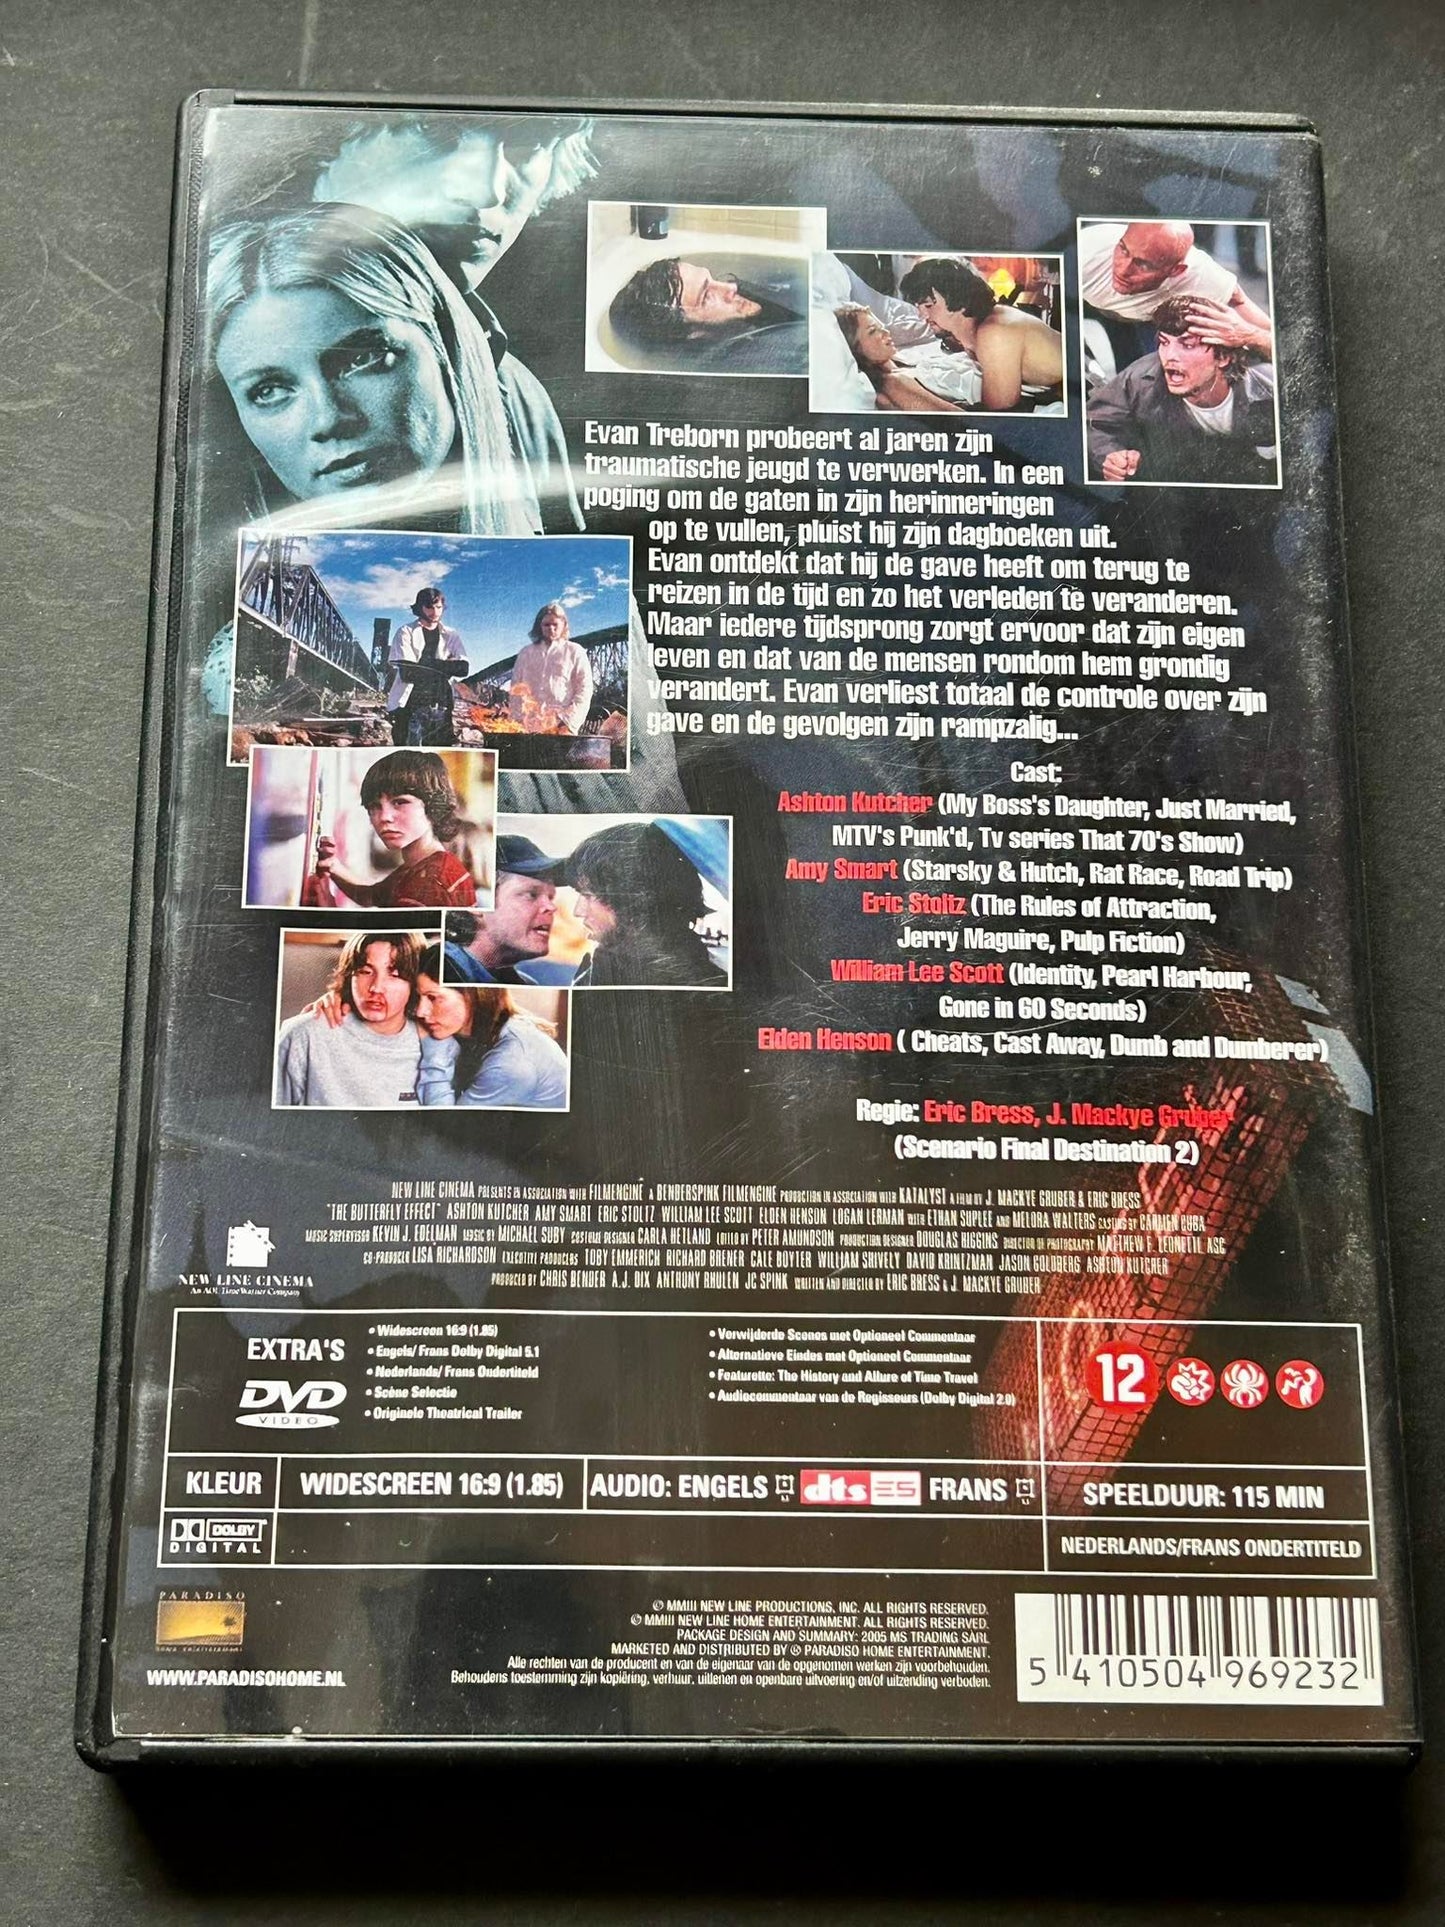 DvD The Butterfly Effect